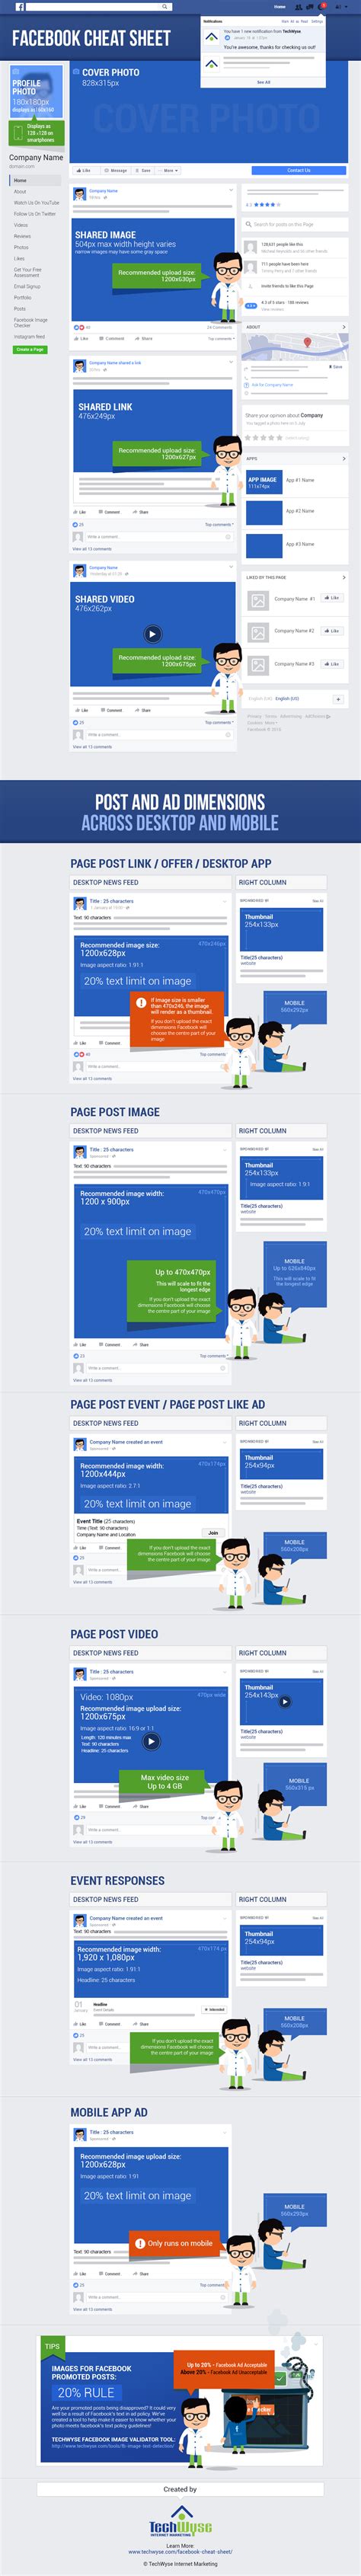 Facebook Cheat Sheet For Travel Brands Infographic